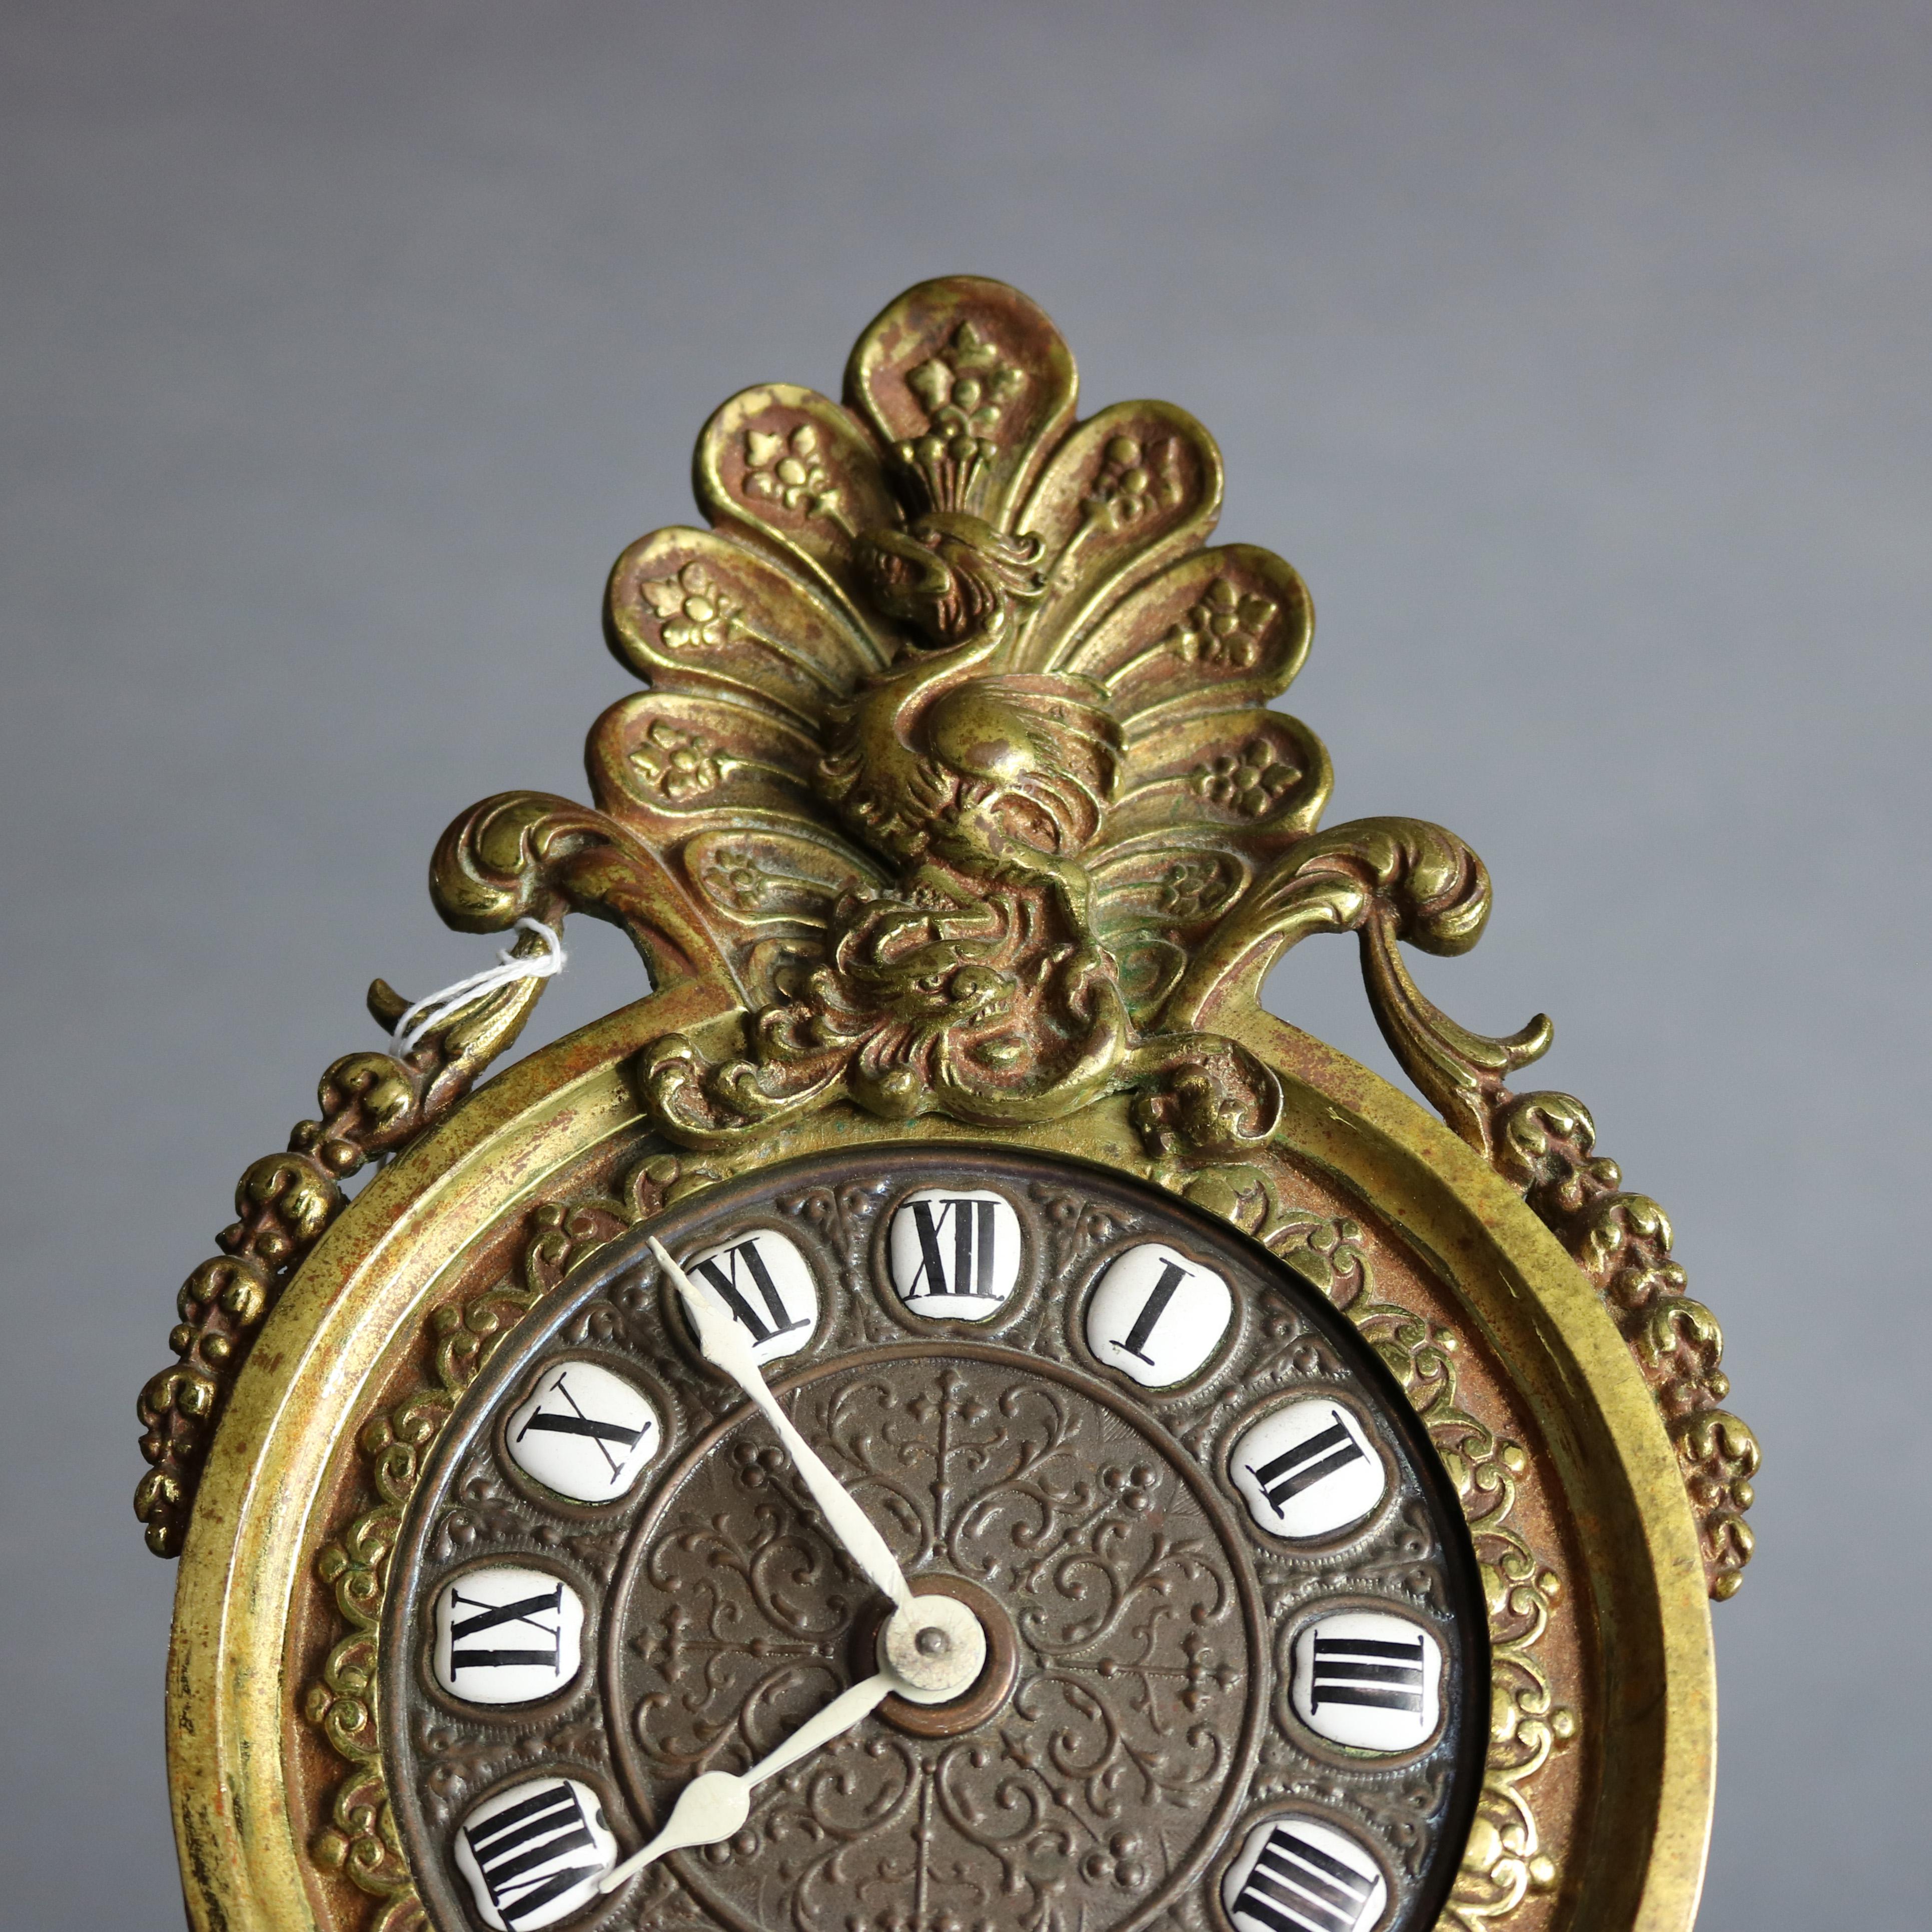 An antique Victorian figural dresser clock offers cast brass construction with peacock finial having flanking cornucopias with inverted bell flowers and surmounting clock face with Roman numerals over central mask with flanking winged dragons and